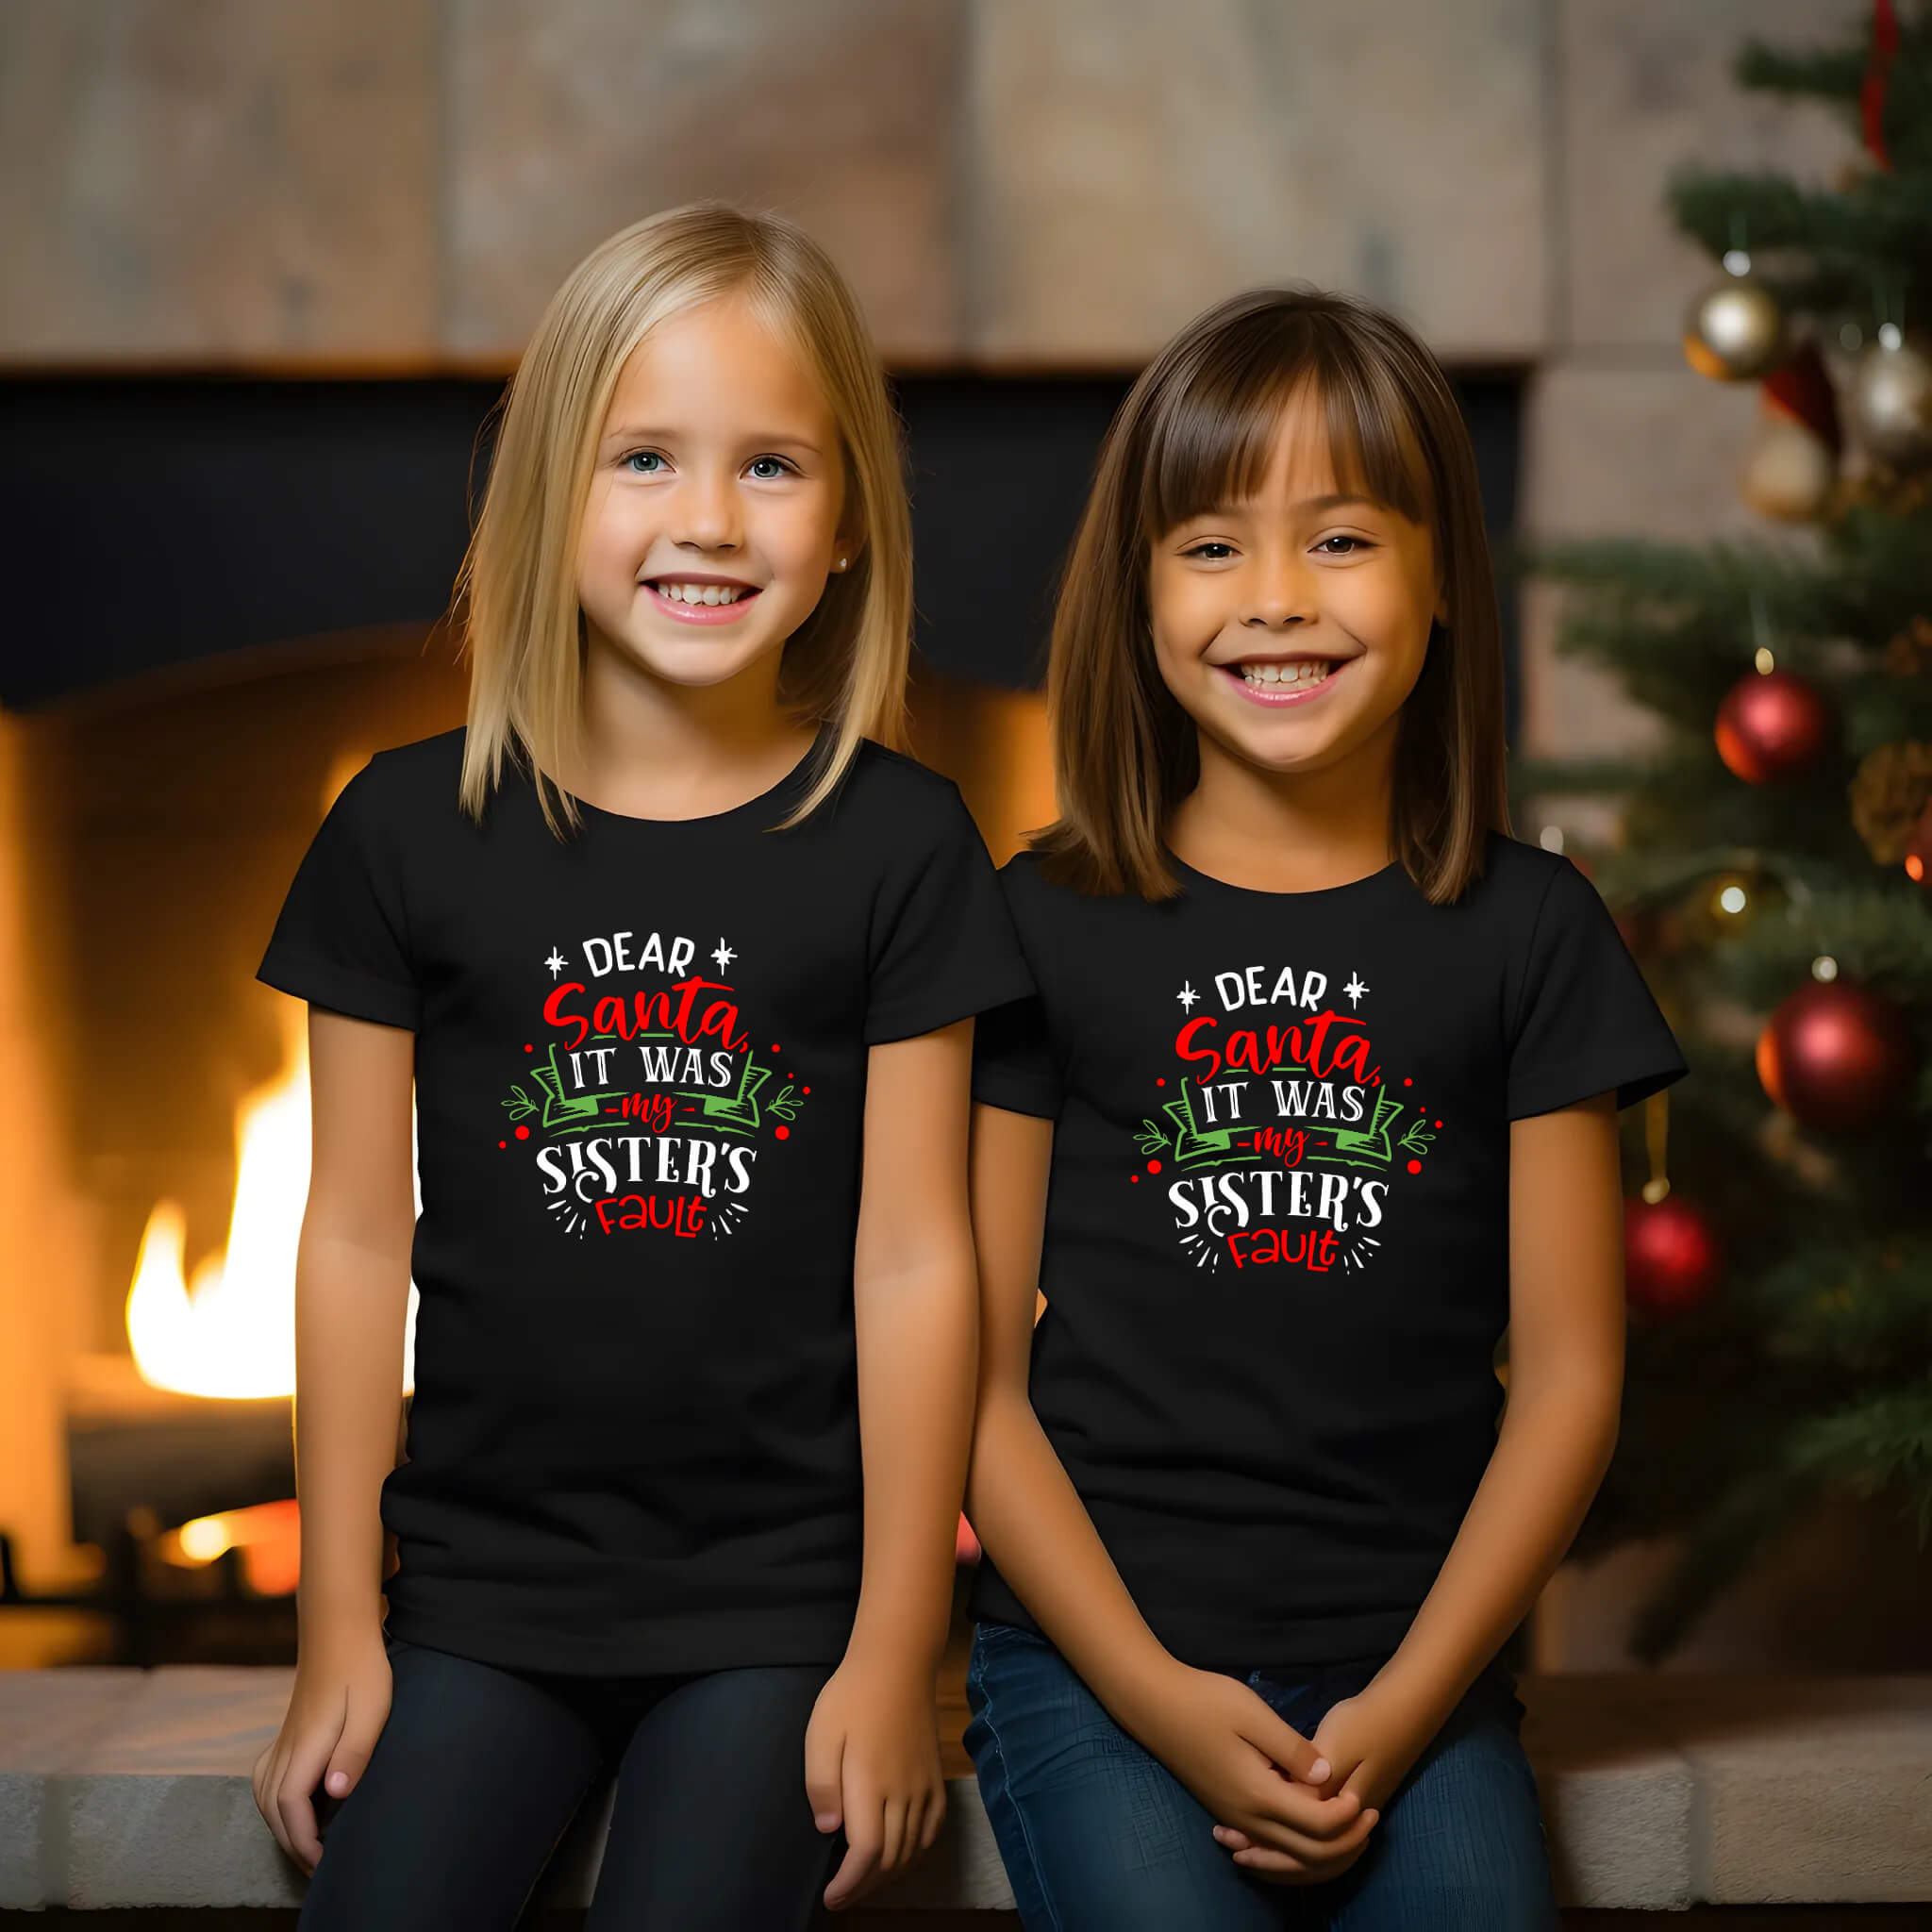 Christmas Dear Santa It Was My Brother's / Sister's Fault Unisex Graphic Print T-Shirt